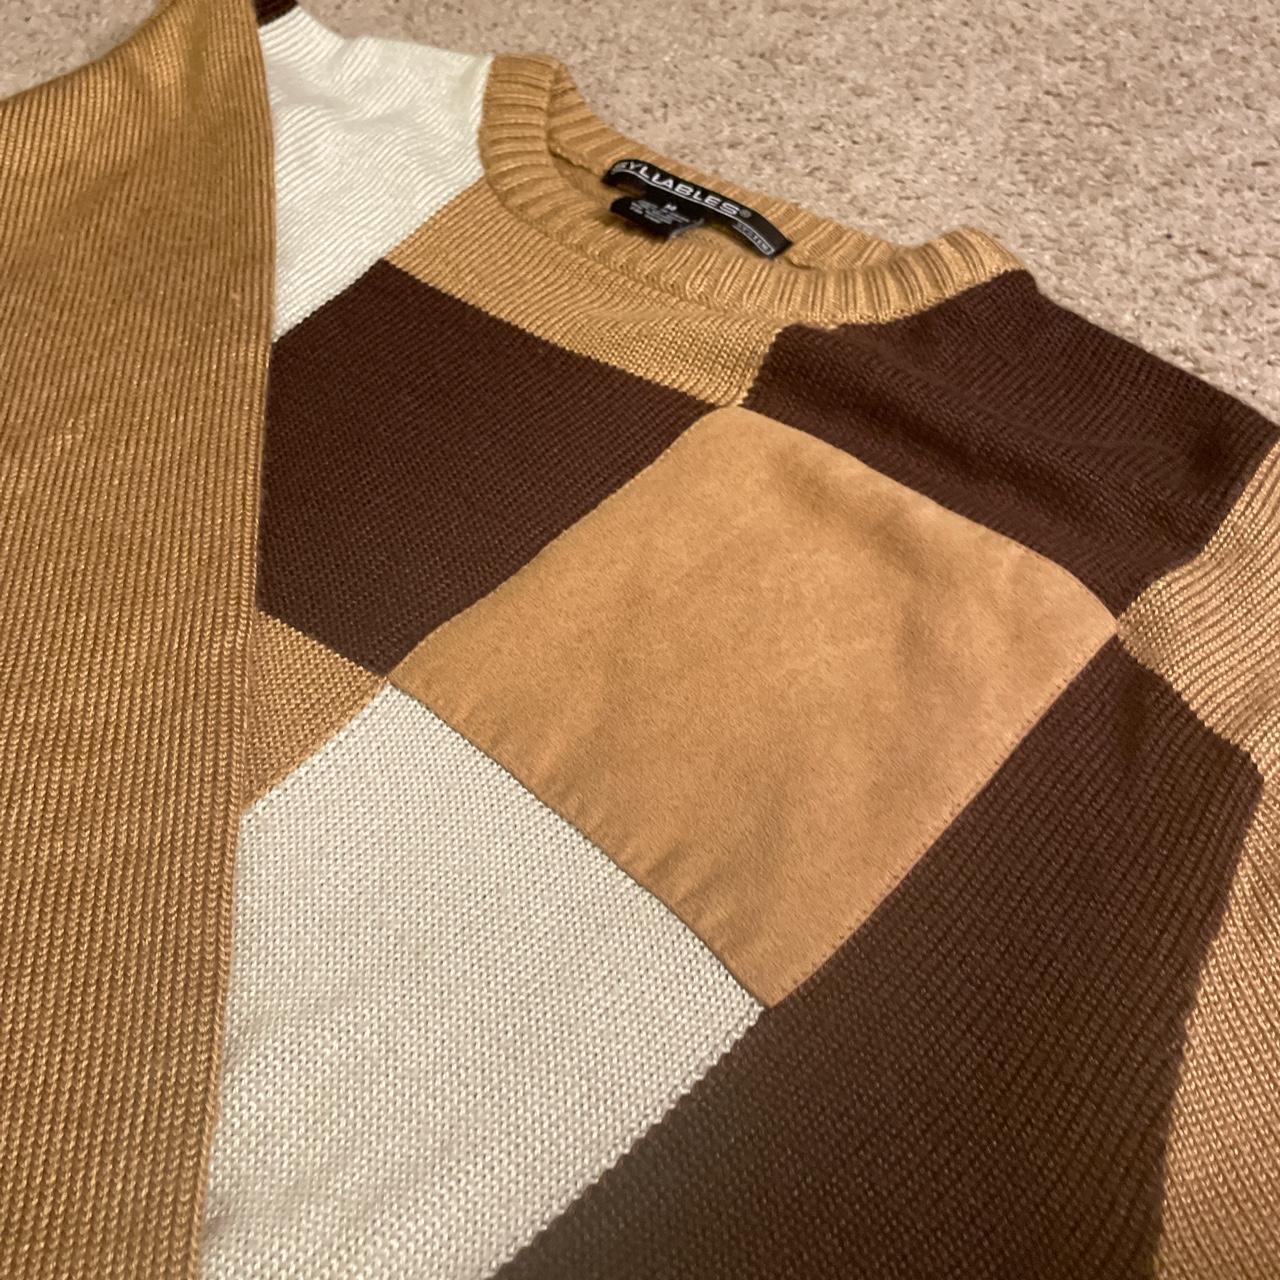 Union Bay Men's Tan and Brown Jumper (3)